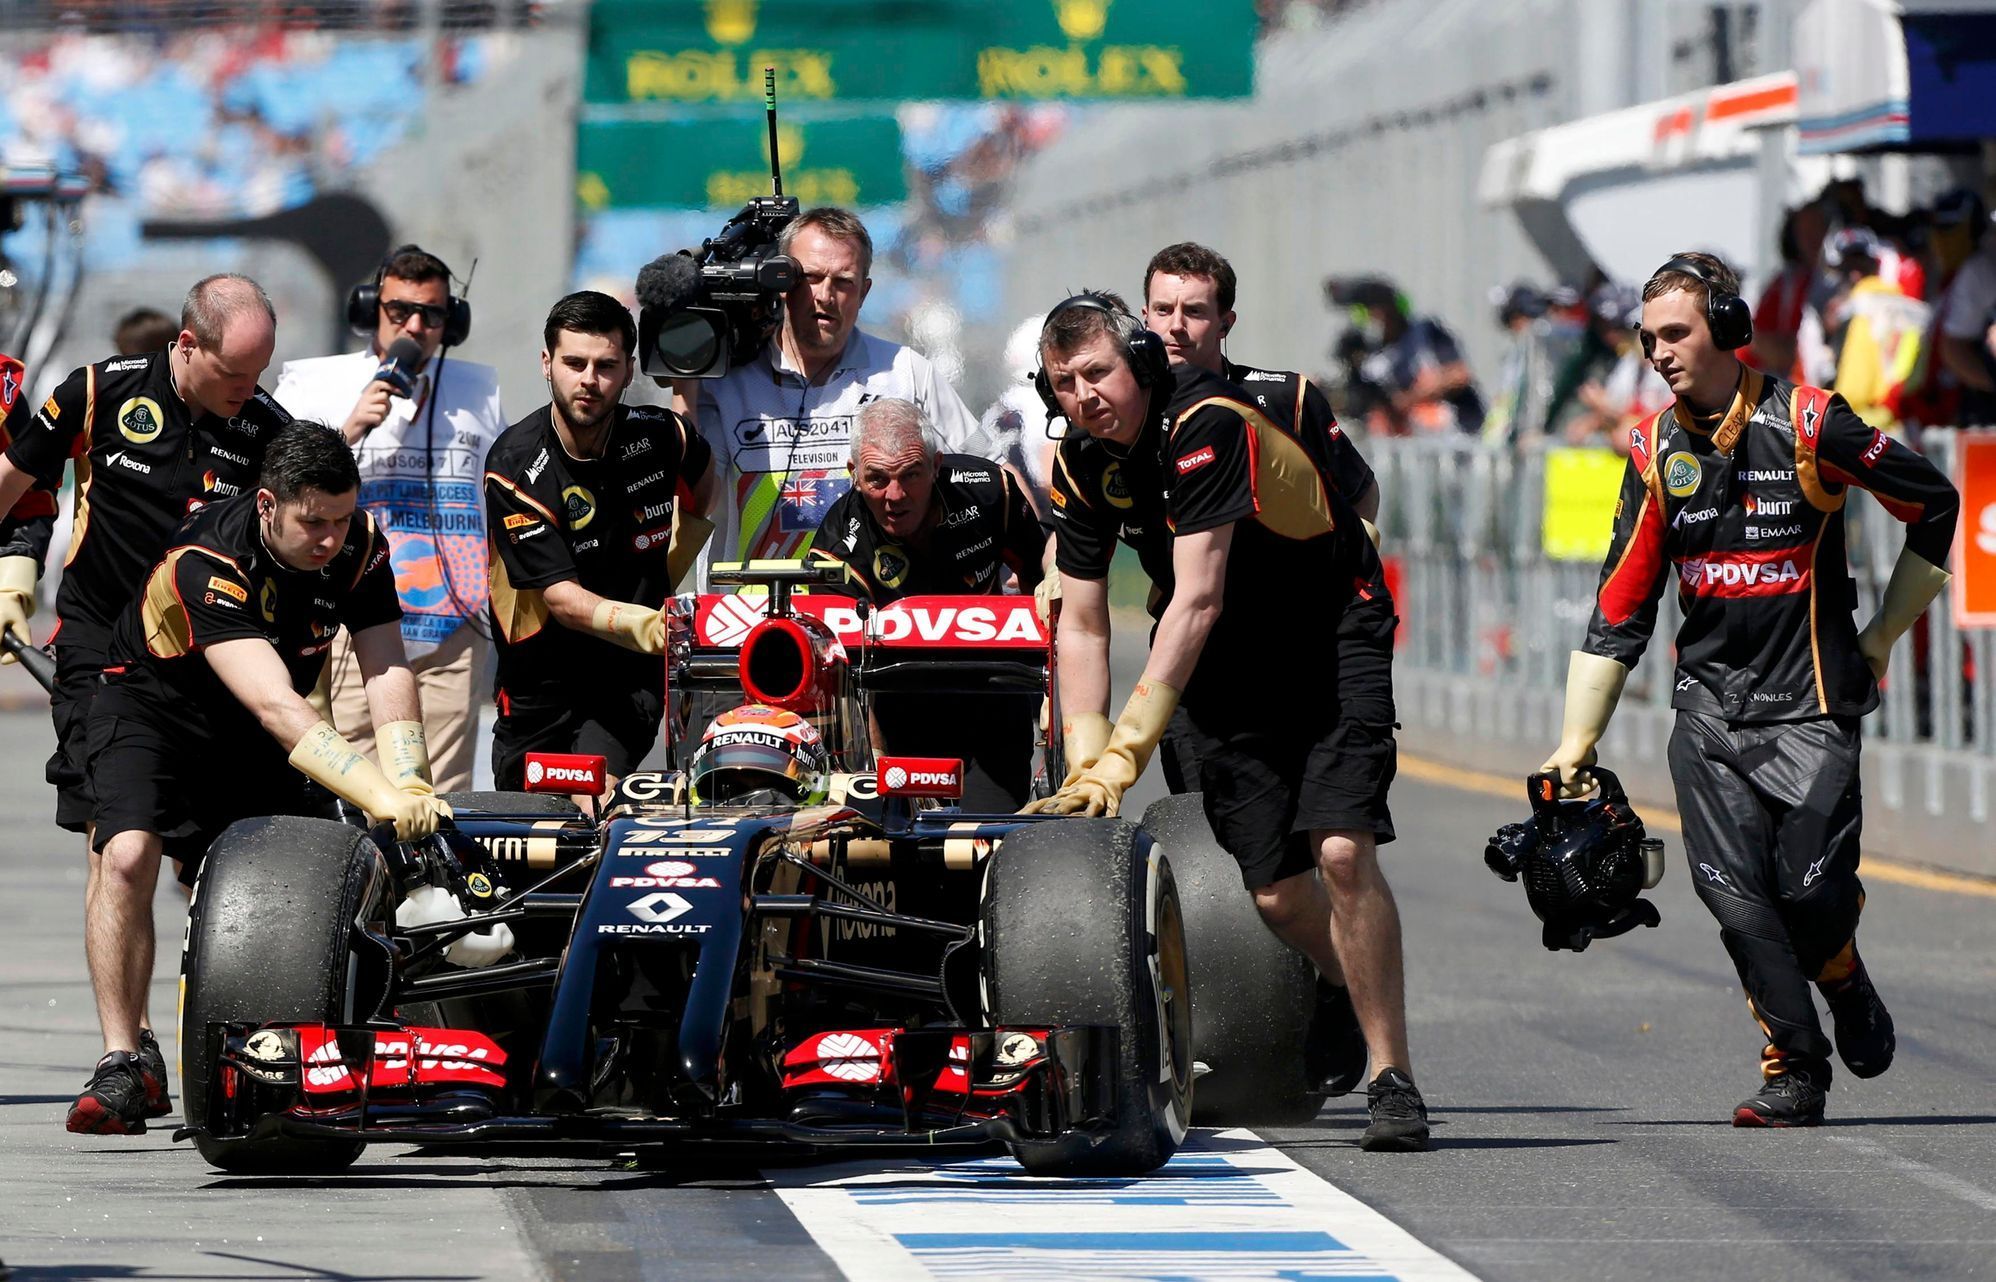 Lotus Formula One driver Maldonado of Venezuela is being pushed down the pits during the first practice session of the Australian F1 Grand Prix in Melbourne